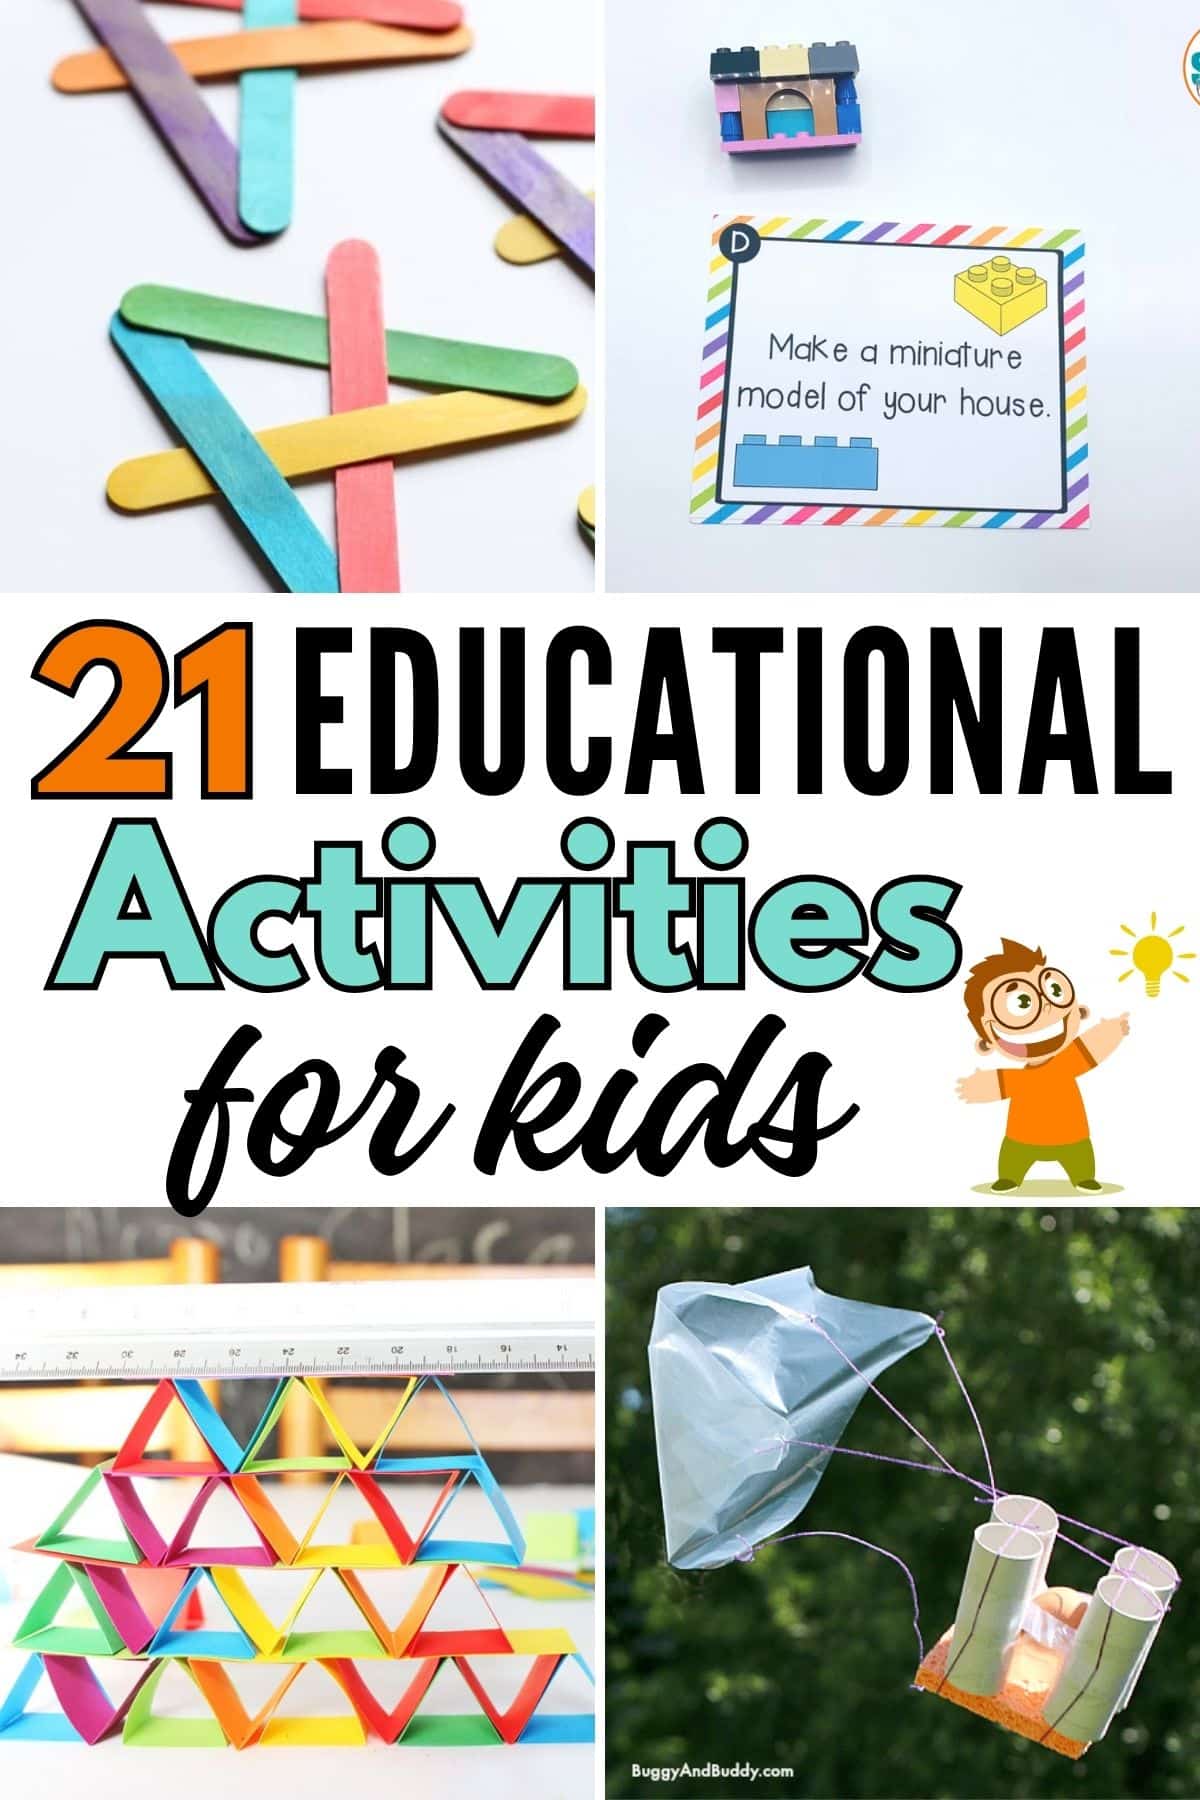 21 activities for kids that are educational.